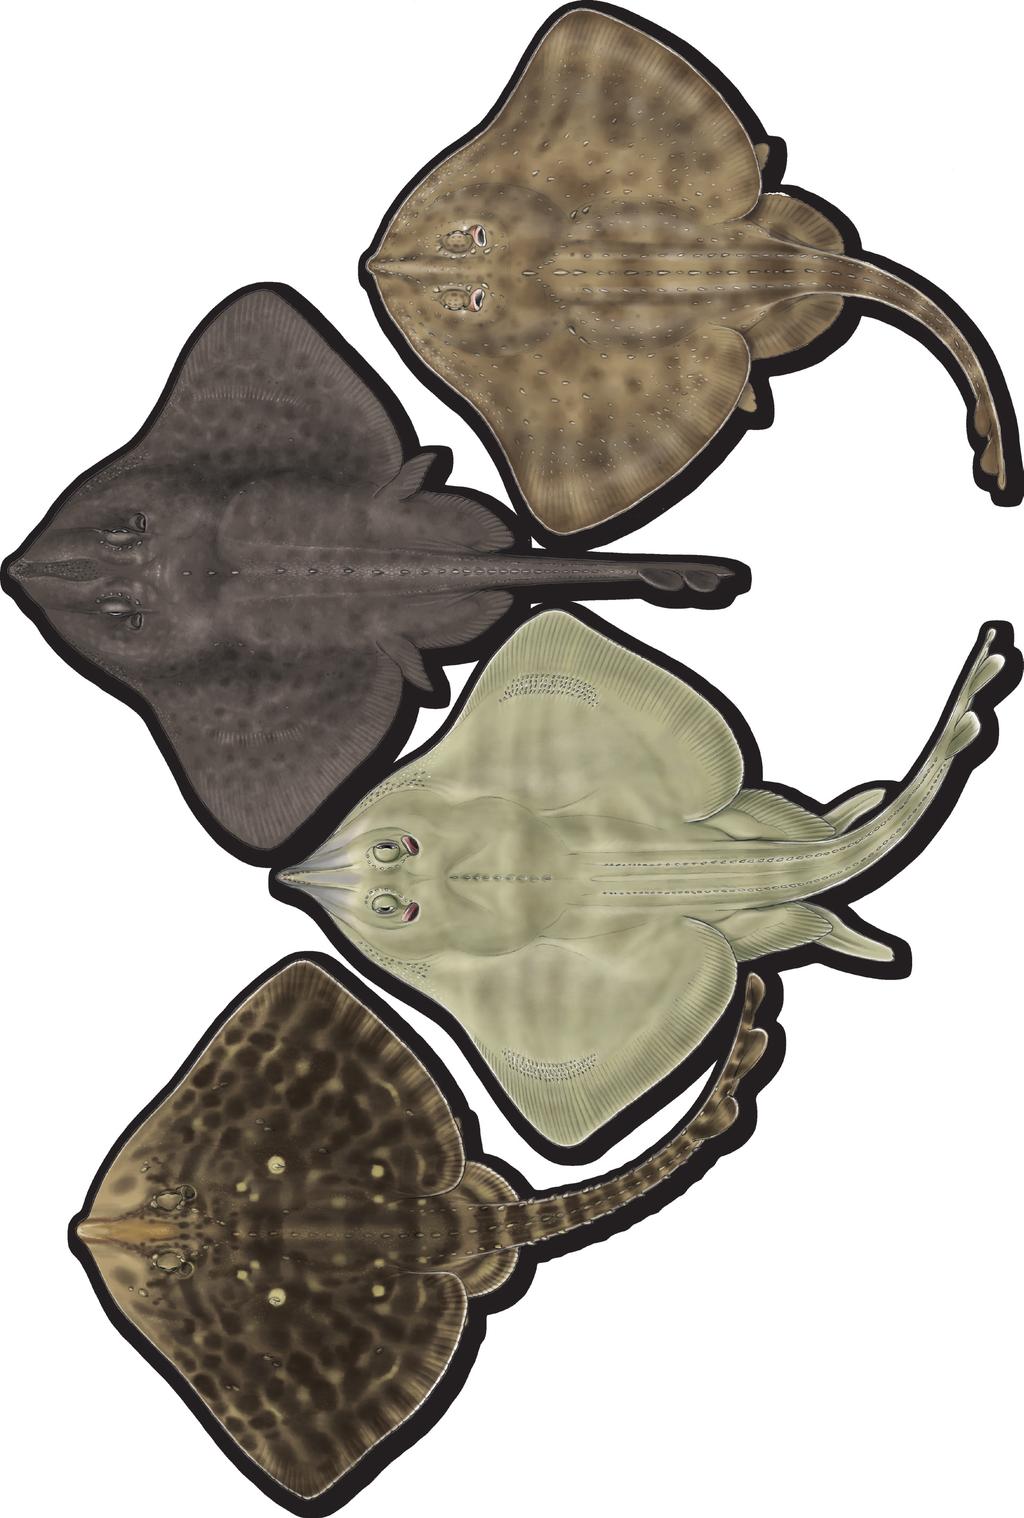 Supported by: tail, making confusion with the Thornback Ray, Raja clavata, possible (Stehmann and Bürkel, 2000).The can reach a maximum total length of 90cm in deep water and higher latitudes.